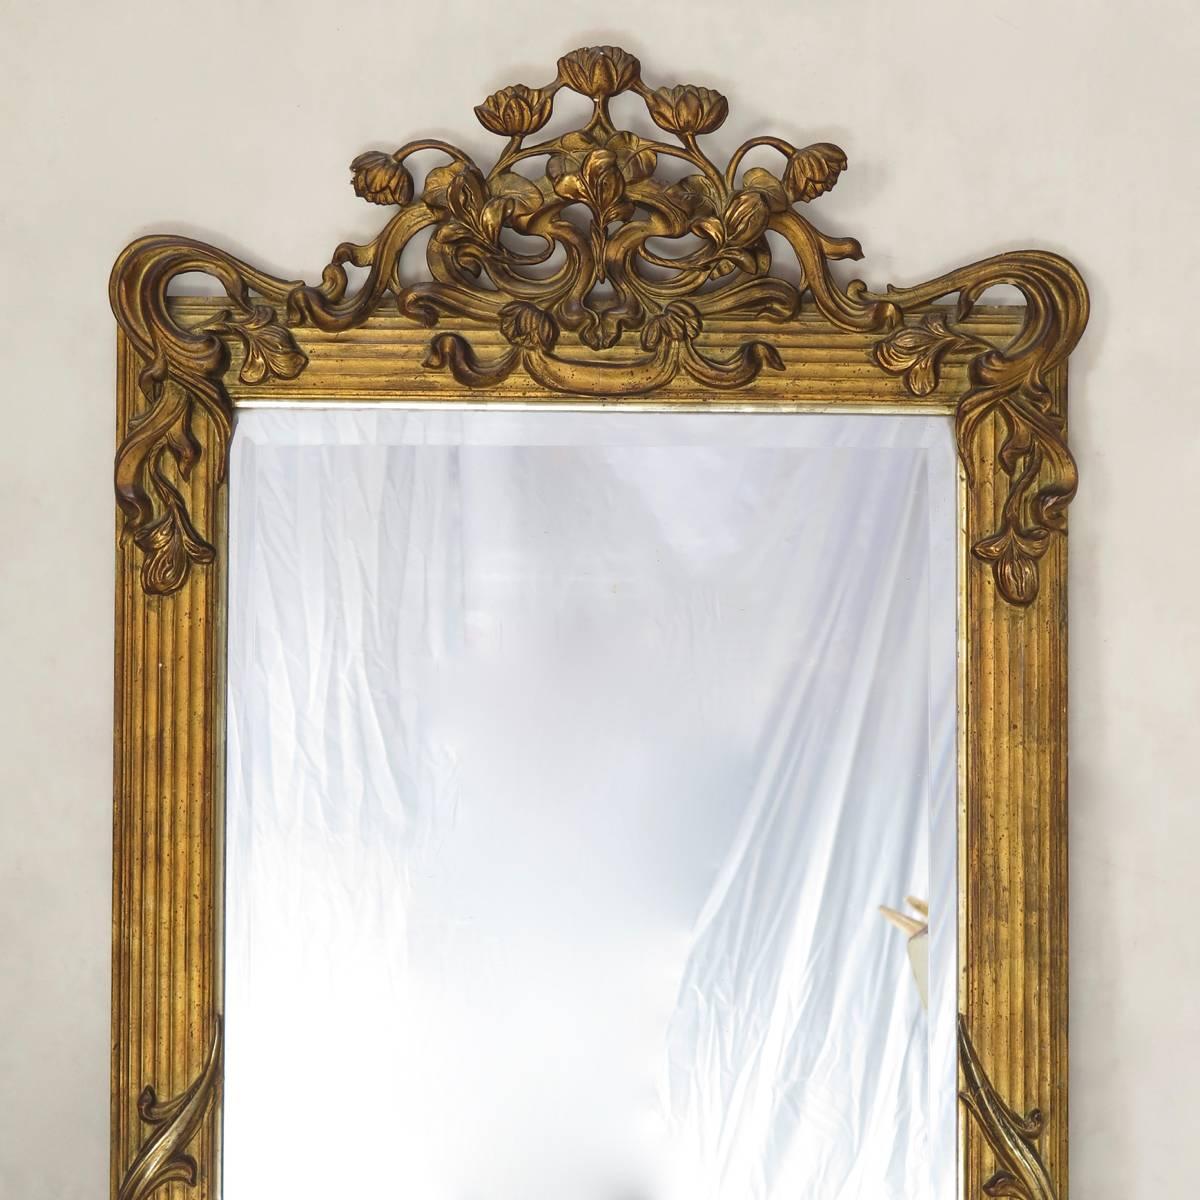 Rare and beautiful large, gilt plaster mirror, with a decor of lotus flowers, irises and scrolling foliage, on a softly reeded frame. Swag detail. The mirror is backed in wood, and with its original, beveled looking glass, in very good condition.